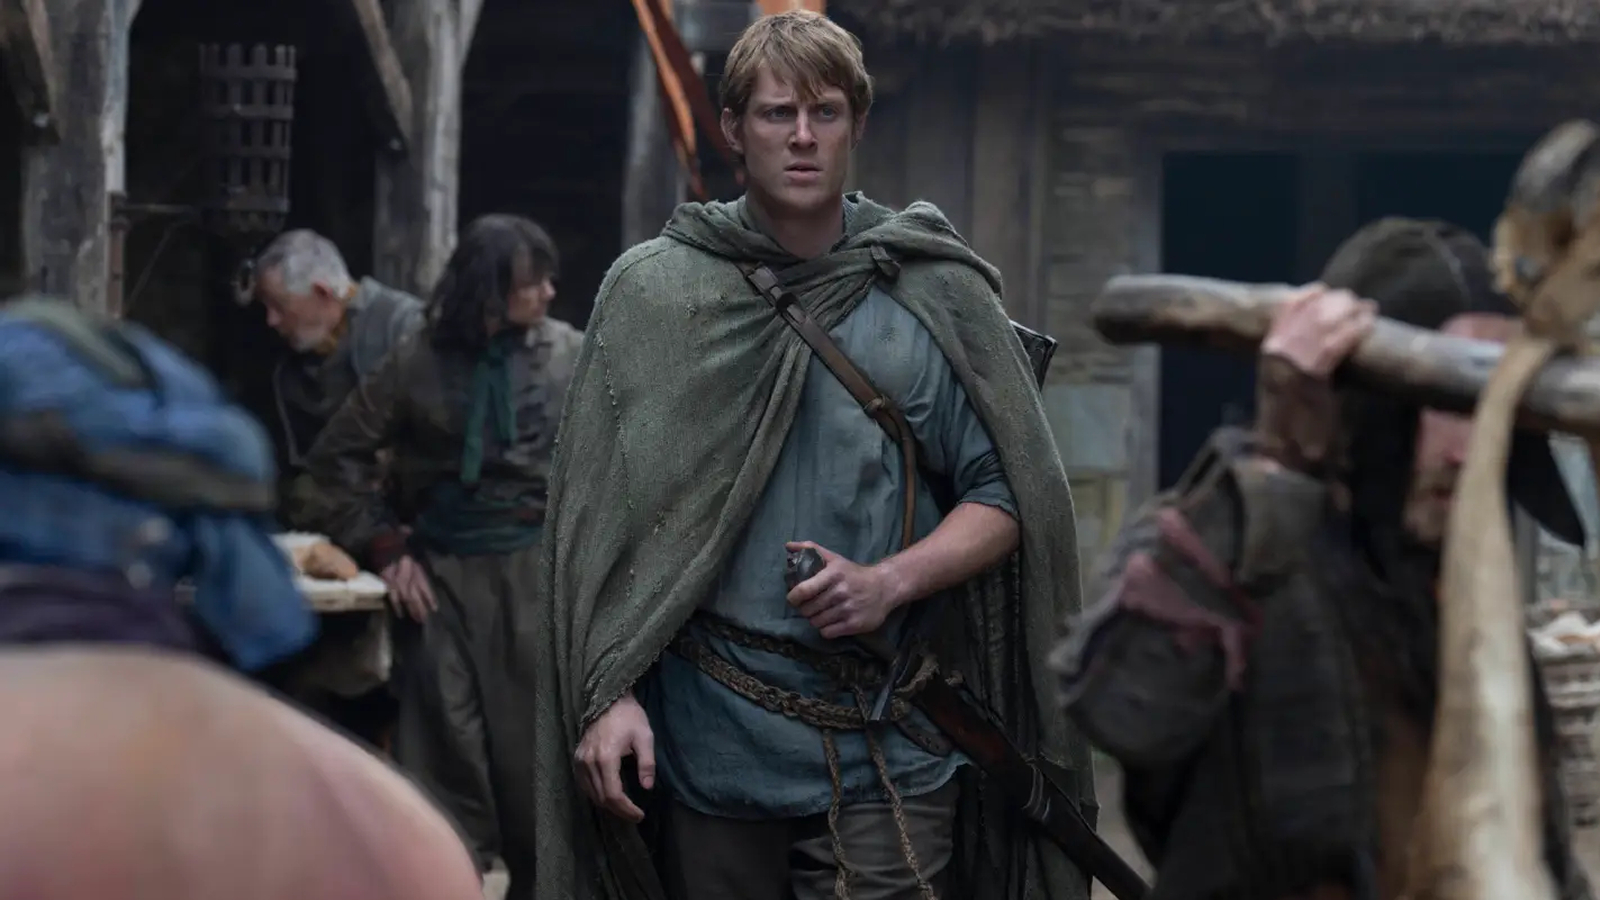 Peter Claffey as Ser Duncan the Tall in A Knight of the Seven Kingdoms